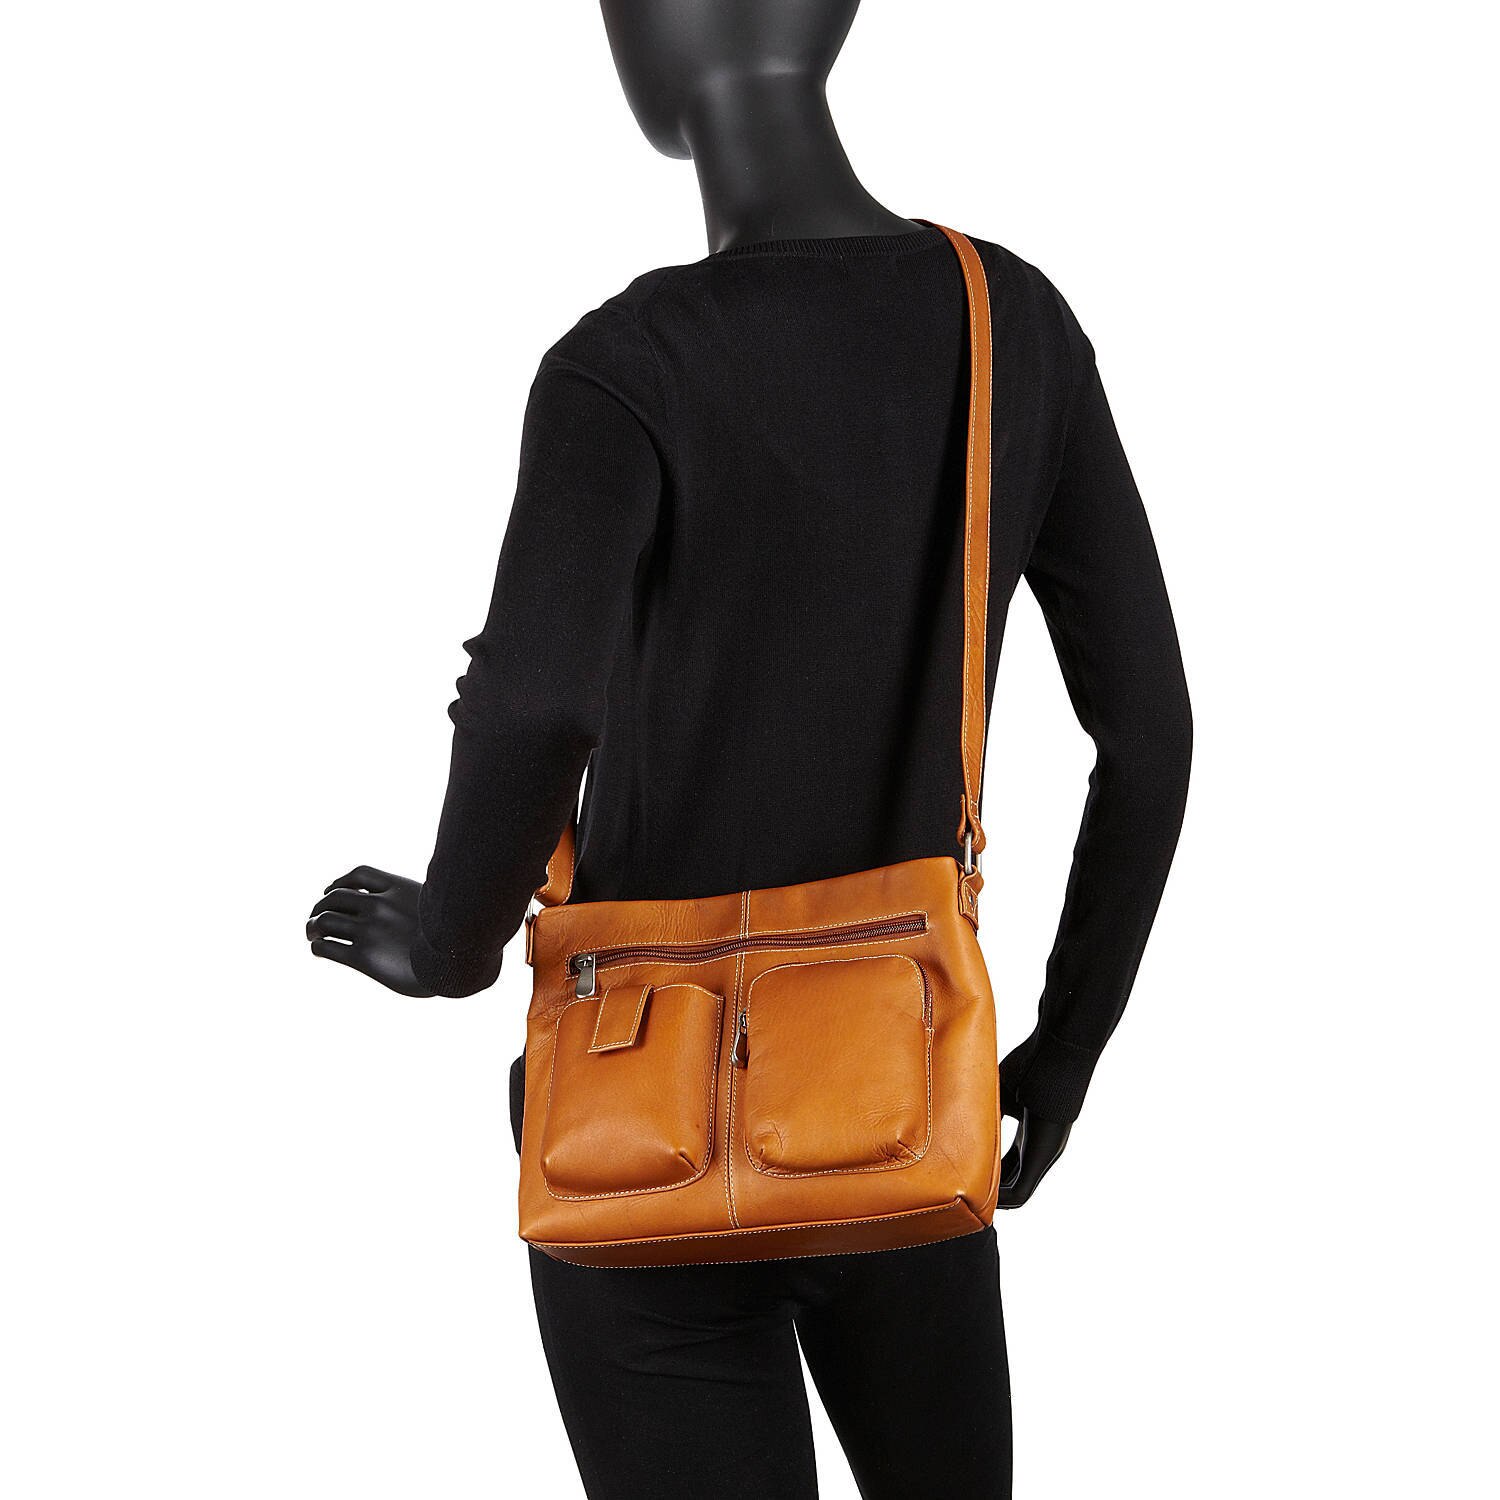 Le Donne Leather Two Pocket Crossbody LD-4054 - image 3 of 5